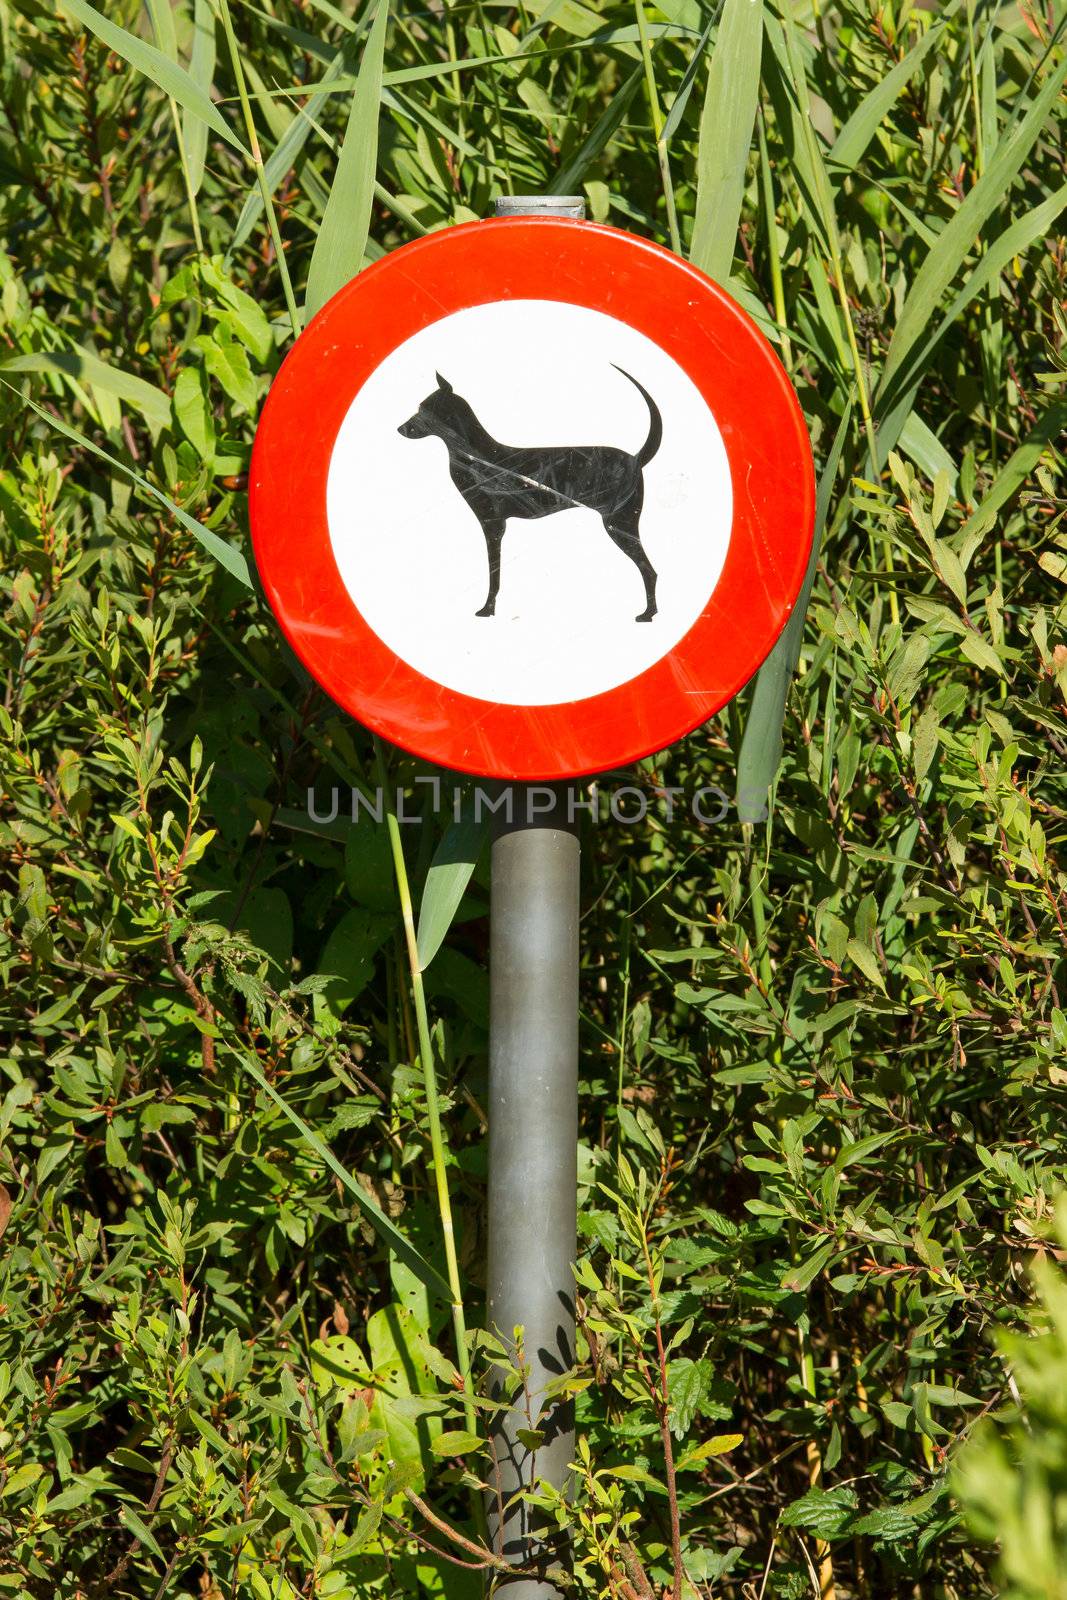 Old damaged sign in the bushes - dogs forbidden, isolated